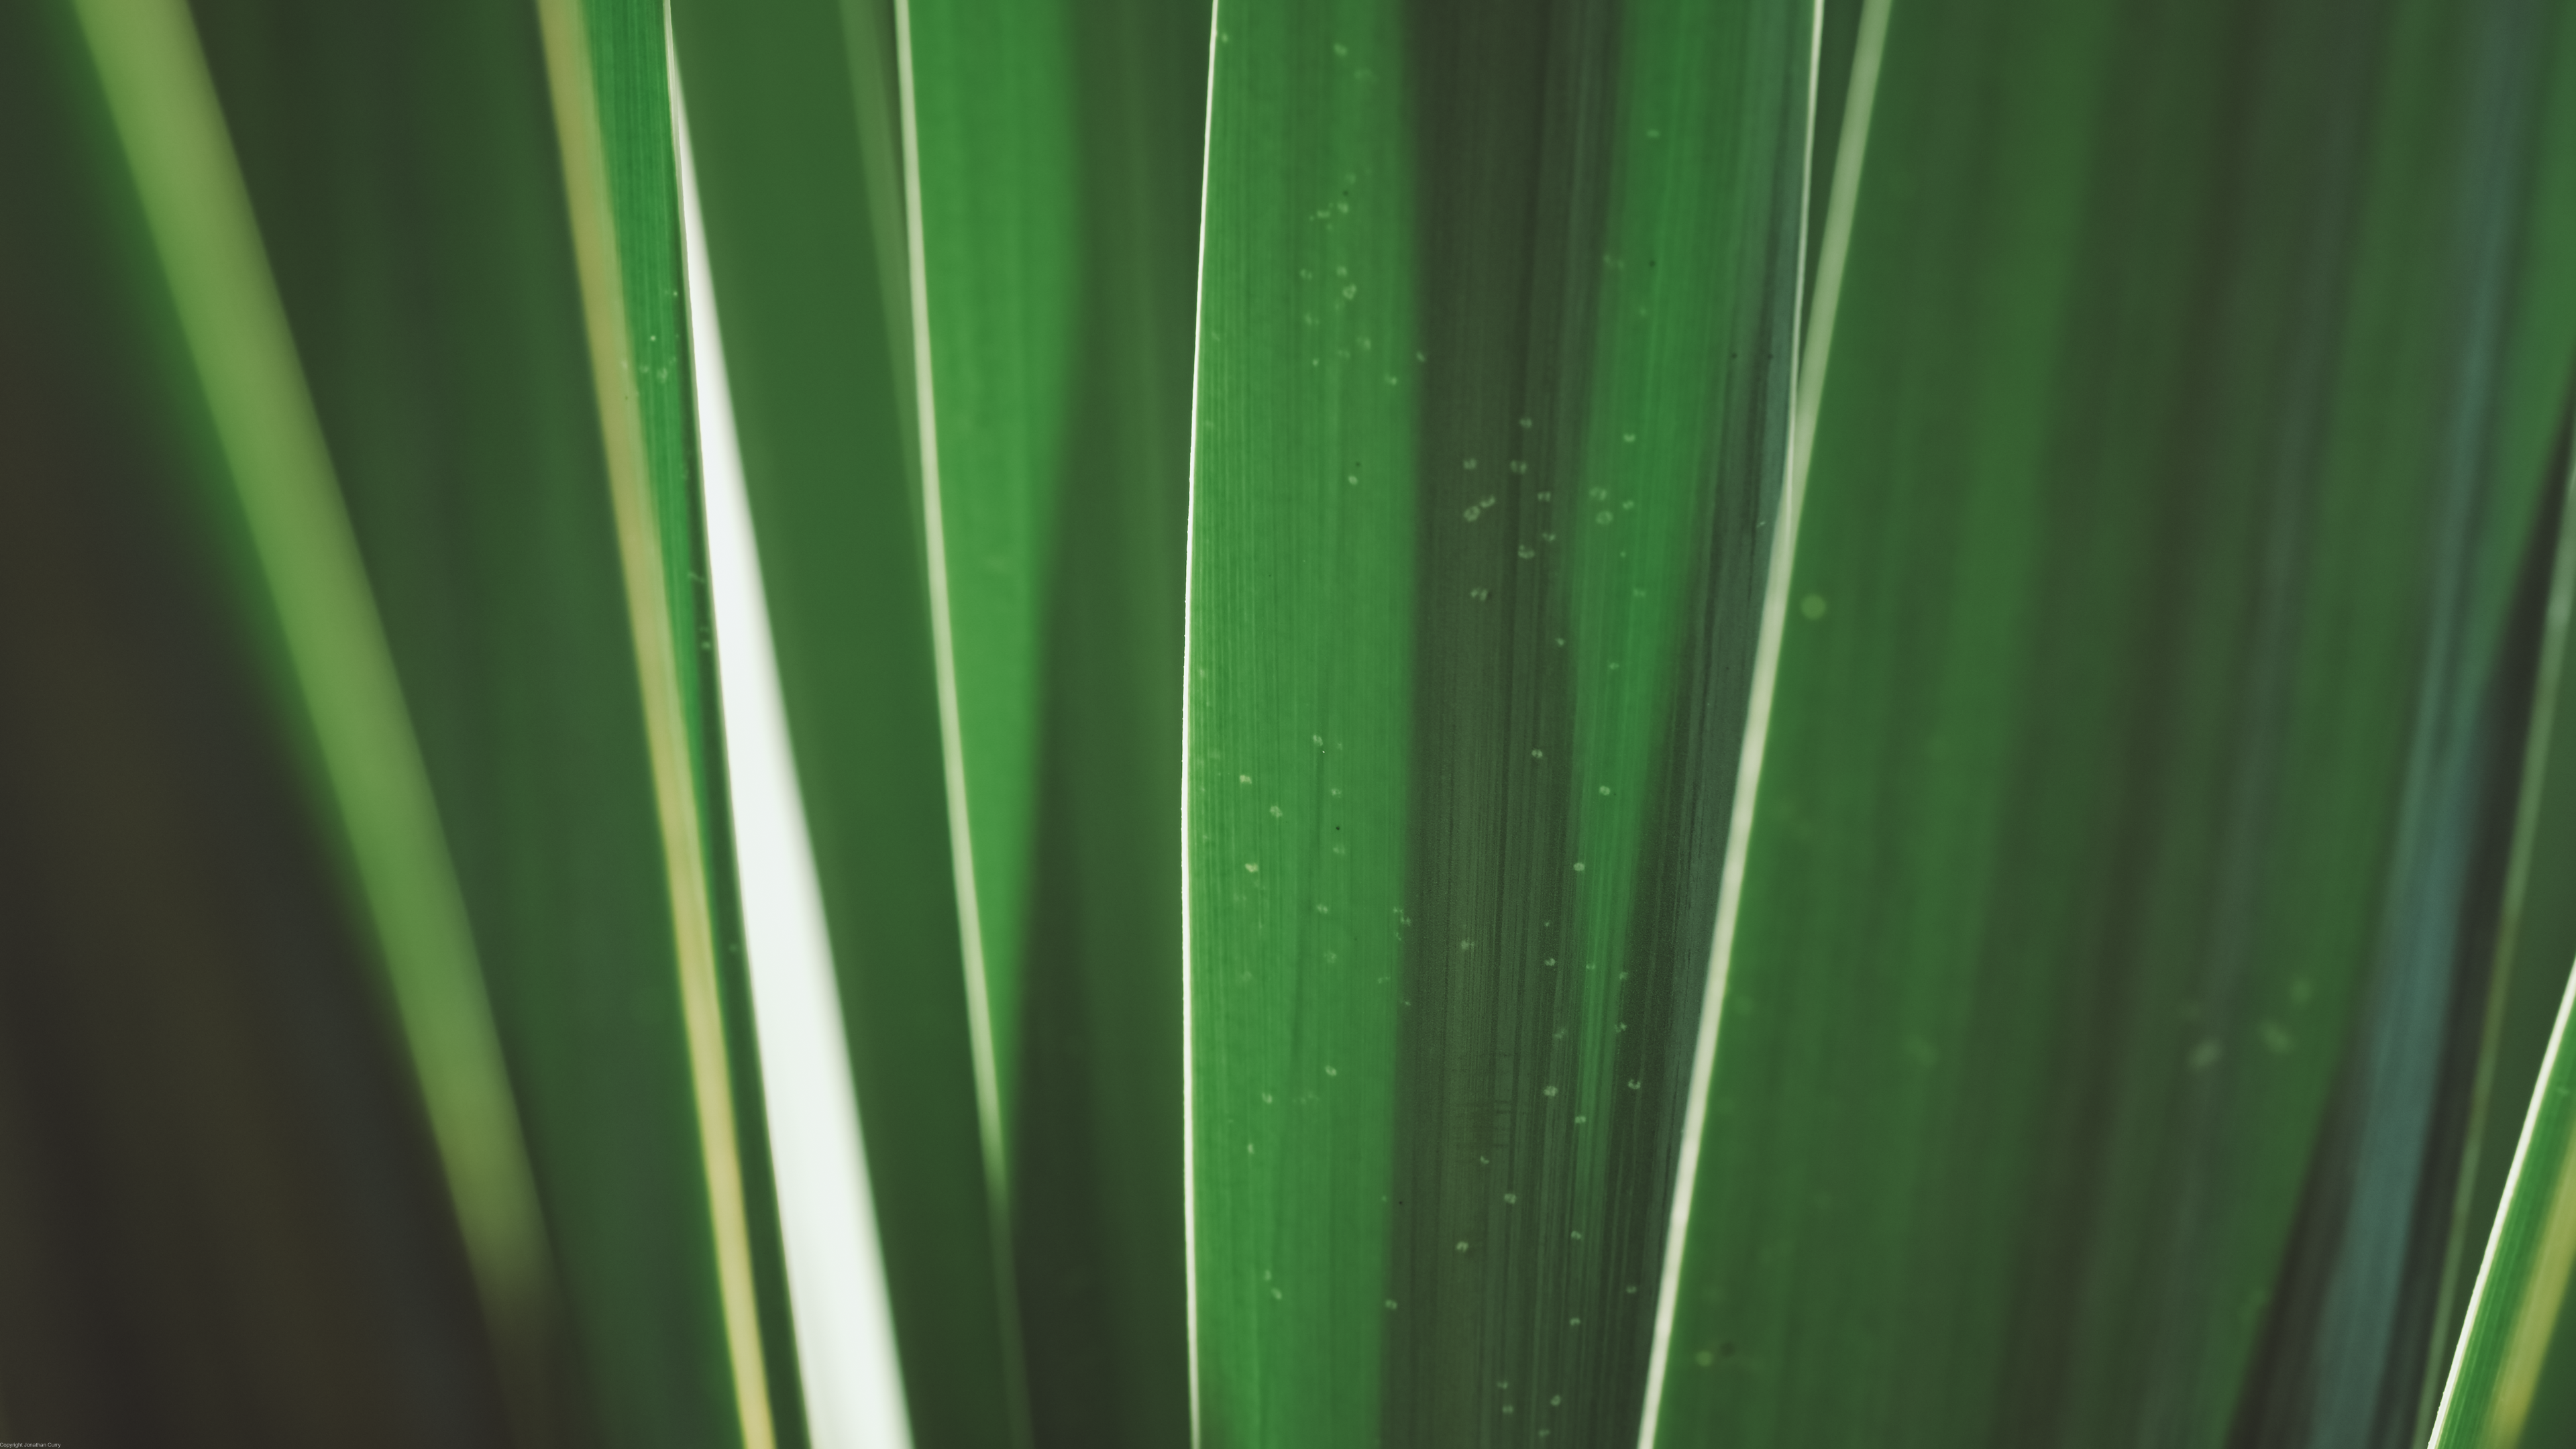 General 3840x2160 plants photography Jonathan Curry outdoors yucca nature leaves closeup minimalism watermarked